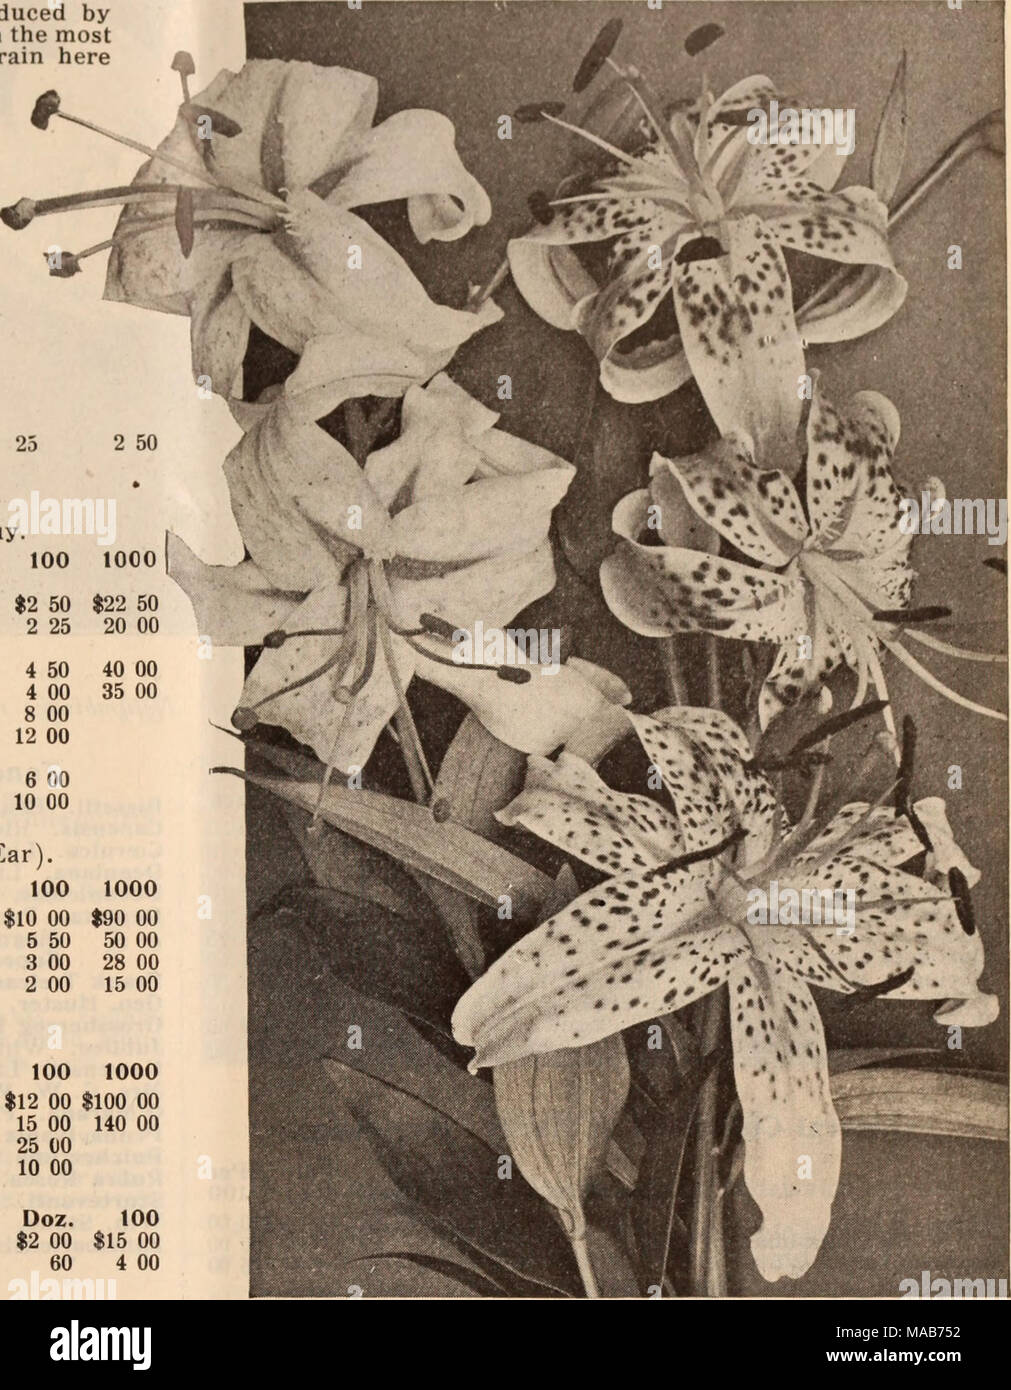 . Dreer's wholesale price list / Henry A. Dreer. . 4 50 4 00 00 12 00 6 00 10 00 LILIUM SPECIOSUMS Montbretias. All of these are highly useful to the florist as a late summer cut flower, particularly the new large flowering variety Germania. Per doz. Per 100 Aurantiaca . Crocosmiseflora Etolie de Feu Qermanla Rayon d'Or . Speciosa . . $1 50 1 CO 1 50 2 00 1 50 1 50 Tigridias. Aurea. Rich yellow Conchiflora Qrandiflora Alba &quot; Rosea Pavonia Qrandiflora Tuberoses. Doz. 100 1000 . 30 $2 25 $20 00 20 2 25 20 00 30 2 25 20 00 311 2 25 20 00 30 2 25 20 00 Double Excelsior Pearl, extra selected b Stock Photo